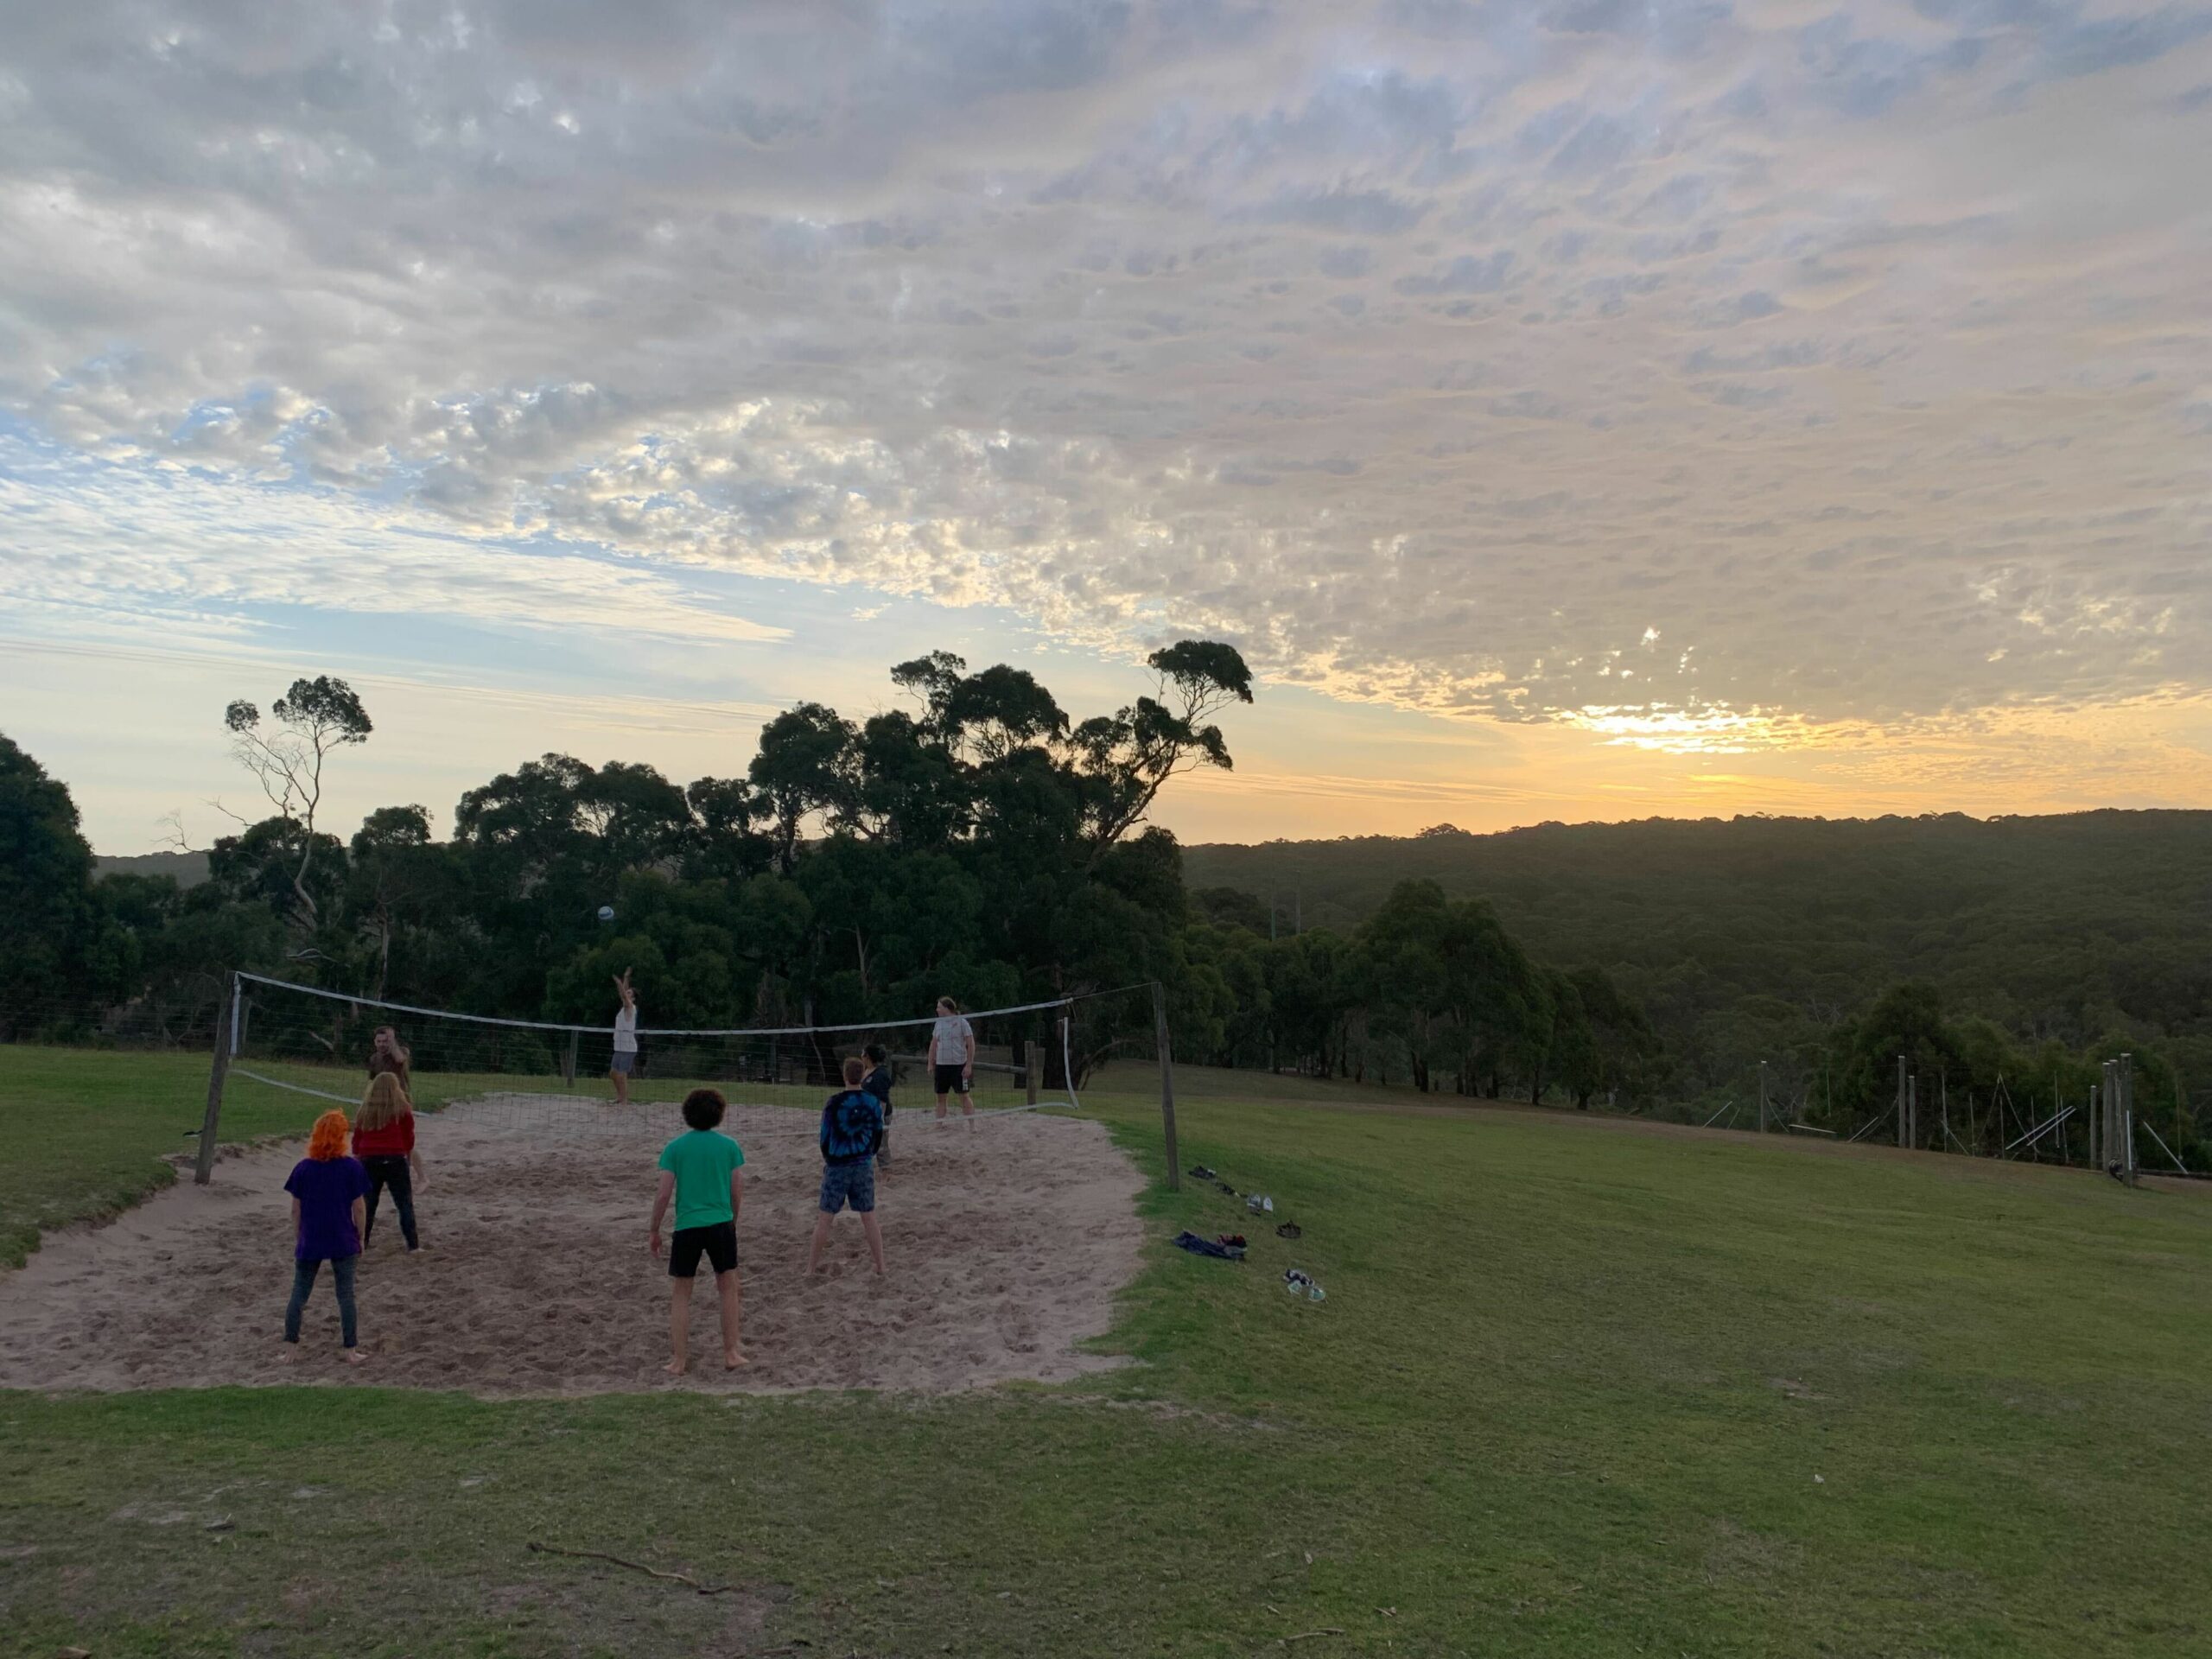 Outside in early evening (setting sun, cloudy sky) a small sandy volleyball pitch sits within a larger grassy area, and some choristers stand on either side playing